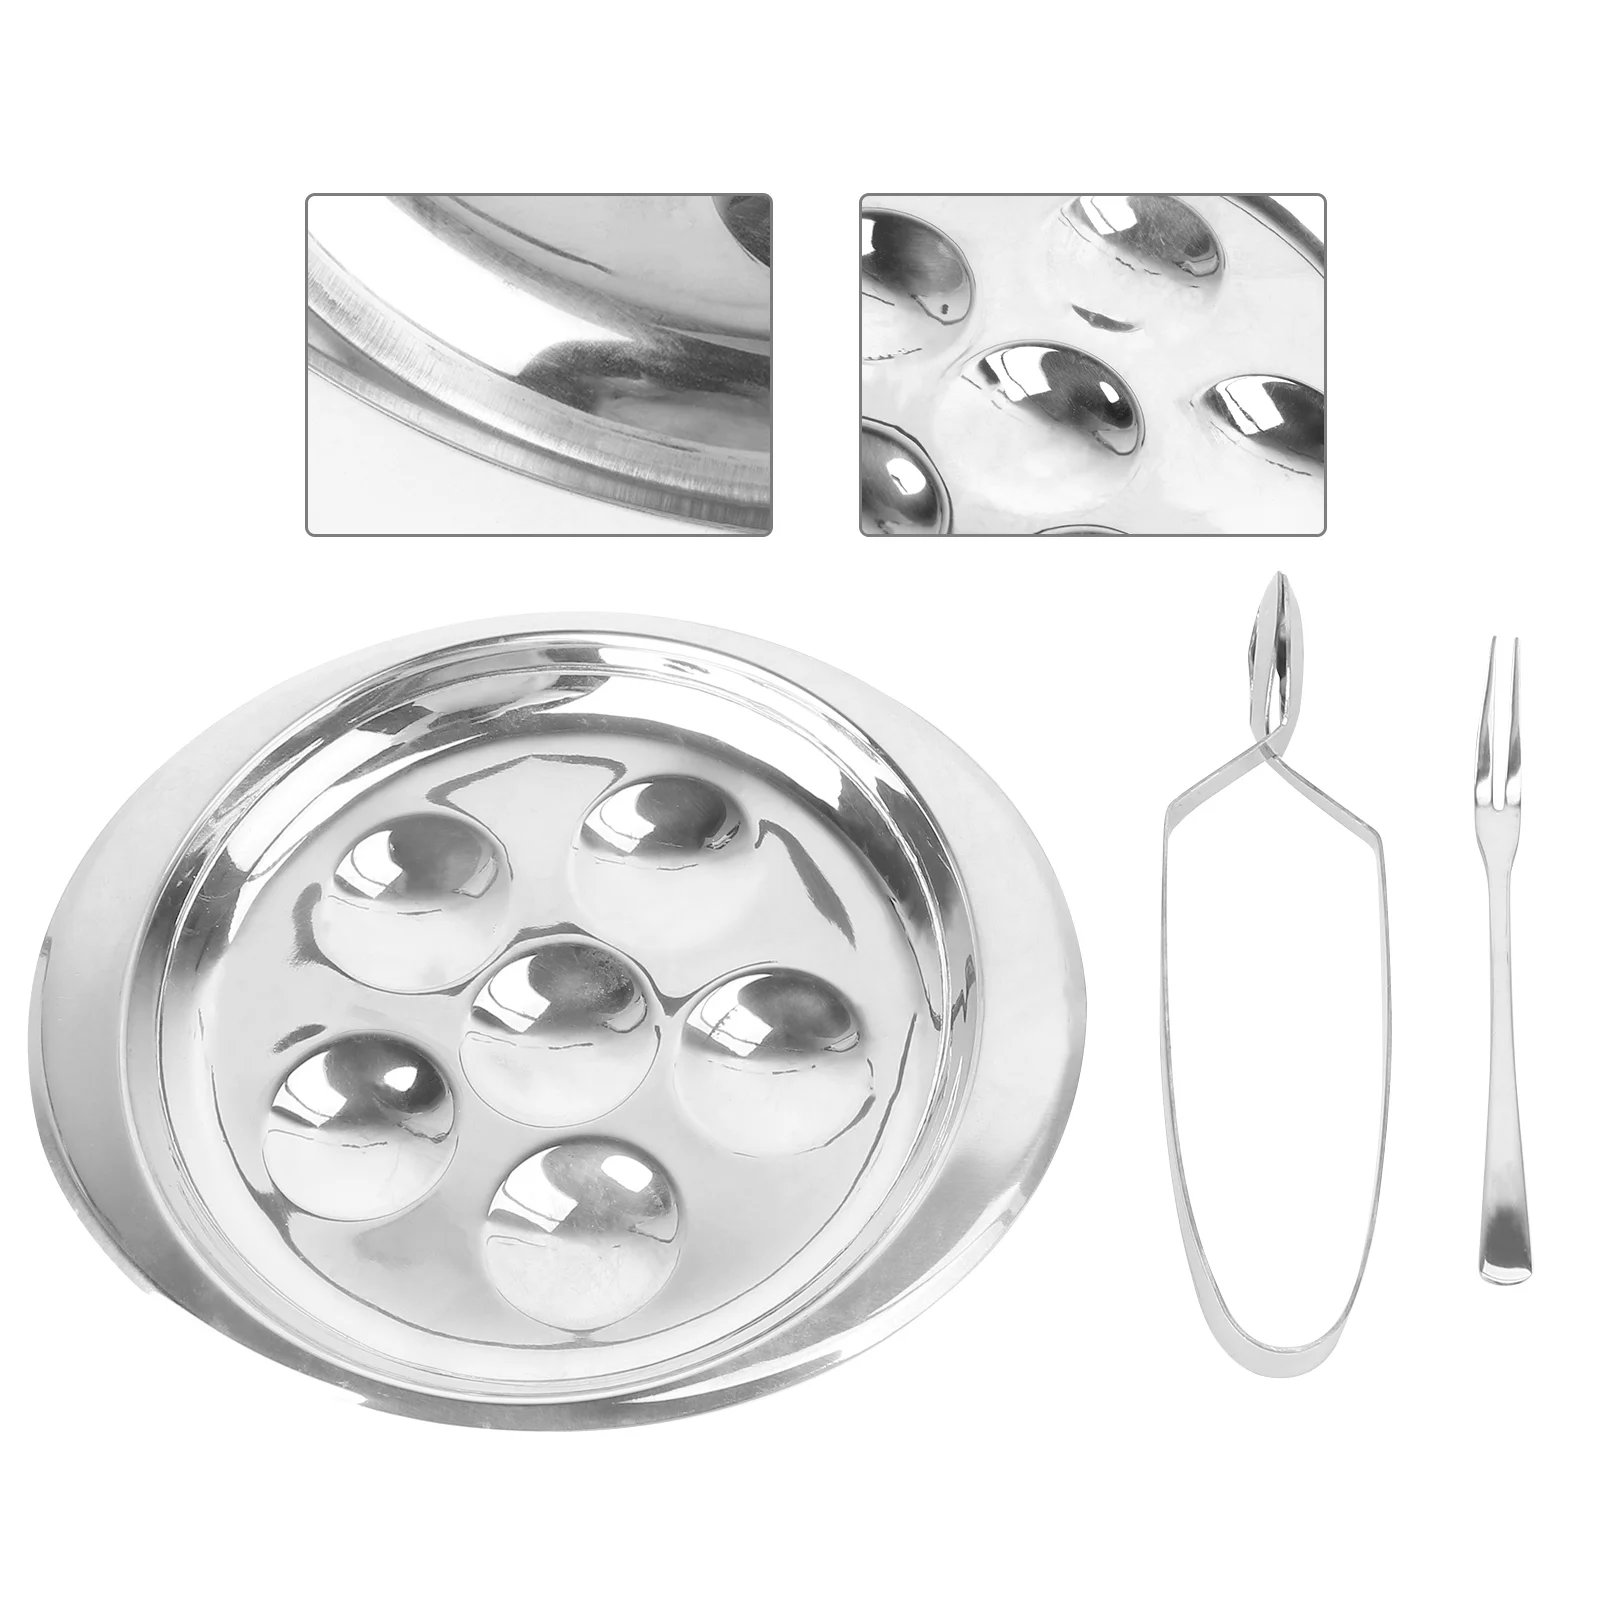 

Metal Snail Plate Nonstick Bakeware Sets Serving Dishes Stainless Steel Cookware Sets Lemon Escargot Cooking Tray Snail Dish